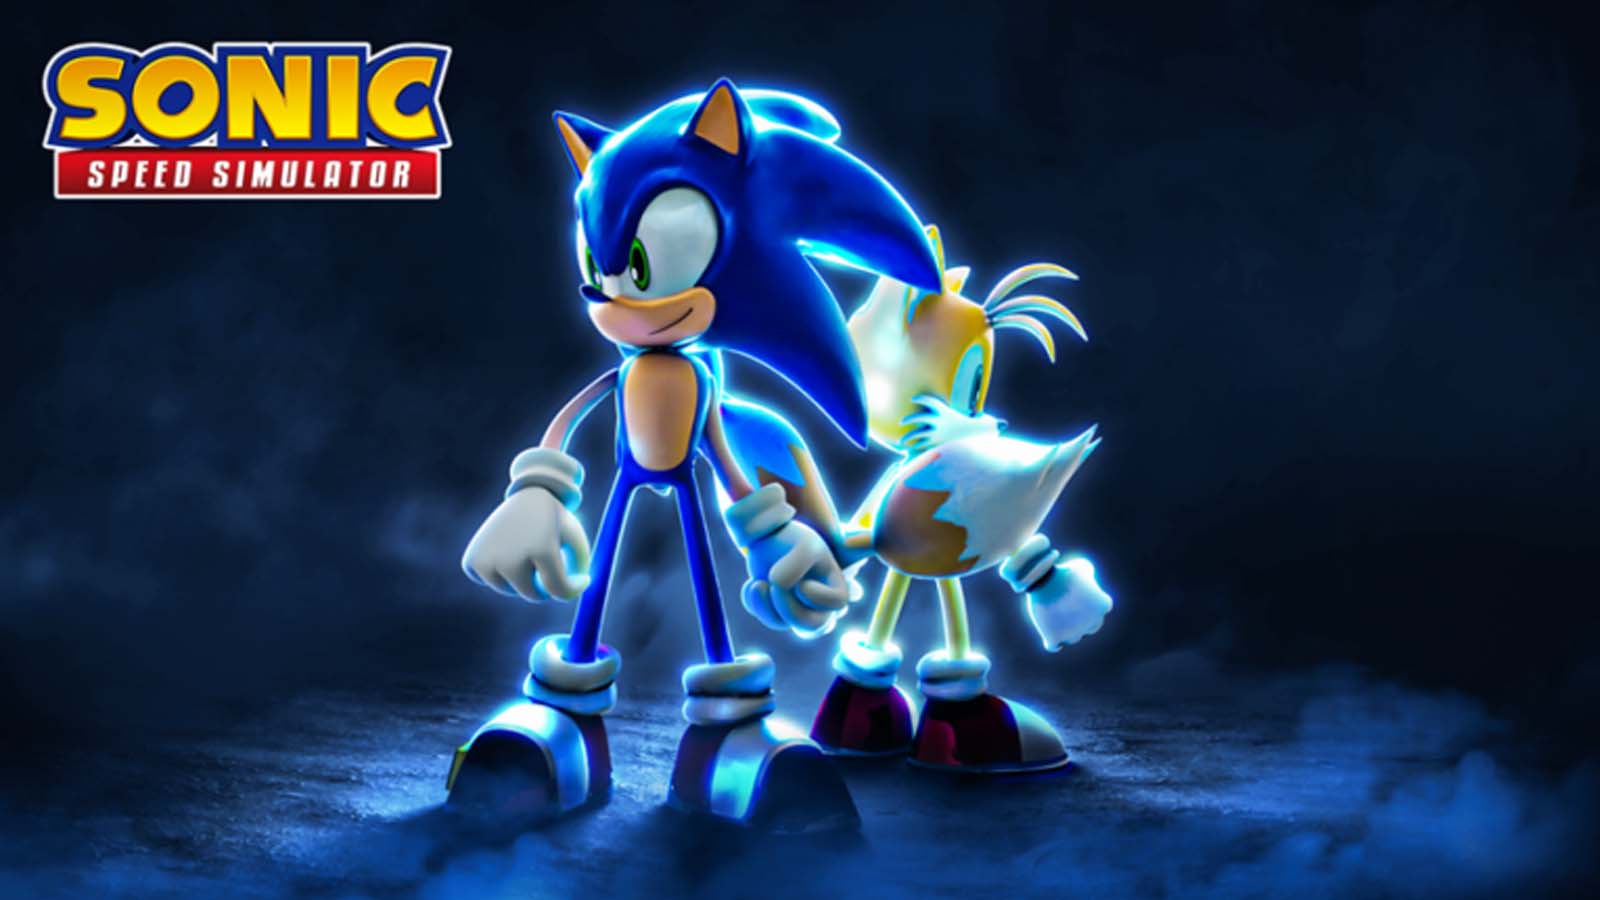 how-to-unlock-classic-sonic-character-fast-in-sonic-speed-simulator